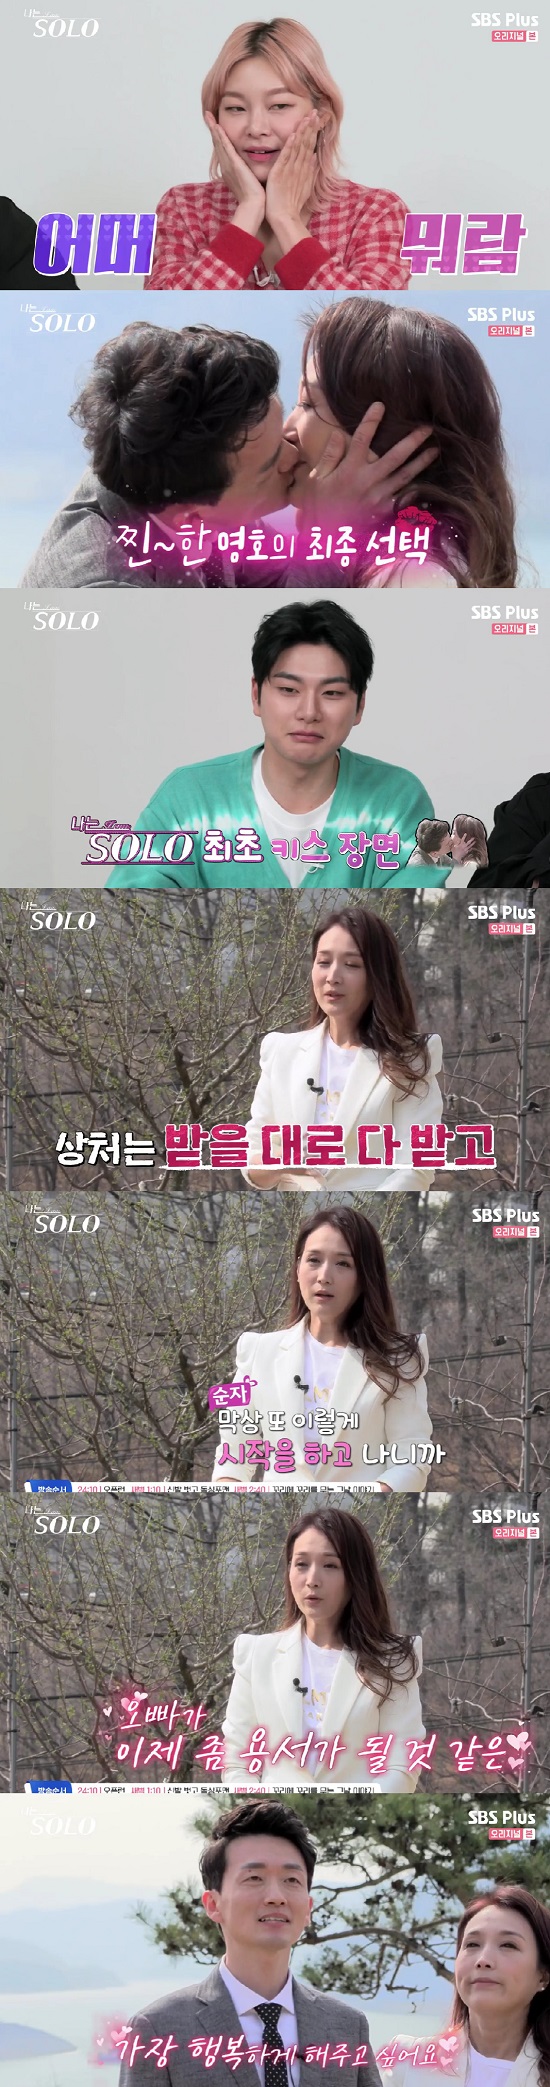 Edo Mad Love (Im SOLO)The final date results of the 7th Solo men and women ahead of the final Choices were released on SBS Plus and ENA PLAYs Real dating program Im SOLO, which aired on the 11th.On this day, Youngho and Sunja showed a hug and hand pod, and the soul showed a sweet appearance saying Do what you did.Young-ho said to Sun-ja, 40sI wanted to do it with my heart. I wanted to try Date with my heart. I have someone who wants to do it together. I will Choices the woman who has made it possible to make crazy love over 40, he said.In the meantime, Youngho approached Sunja and said, My name is a chewy. He then played The Kiss.So the studio was surprised, and Song Hae-na said, I did not want to see this. 40sIts so hot, she said, delighted.Lee Yi-kyoung surprised, saying, Im SOLOs first The Kiss.Soonja told Youngho, What does it mean to do these Choices again?I was hurt and I was meaning to it, but after I started, my brother seemed to be forgiven. I think there have been a lot of things we dont know for two months, Lee Yi-kyoung said.Young-ho said, I want to be the happiest.I want to be happy to do this, he said. I have to live together in a few years.Photo: SBS Plus broadcast screen